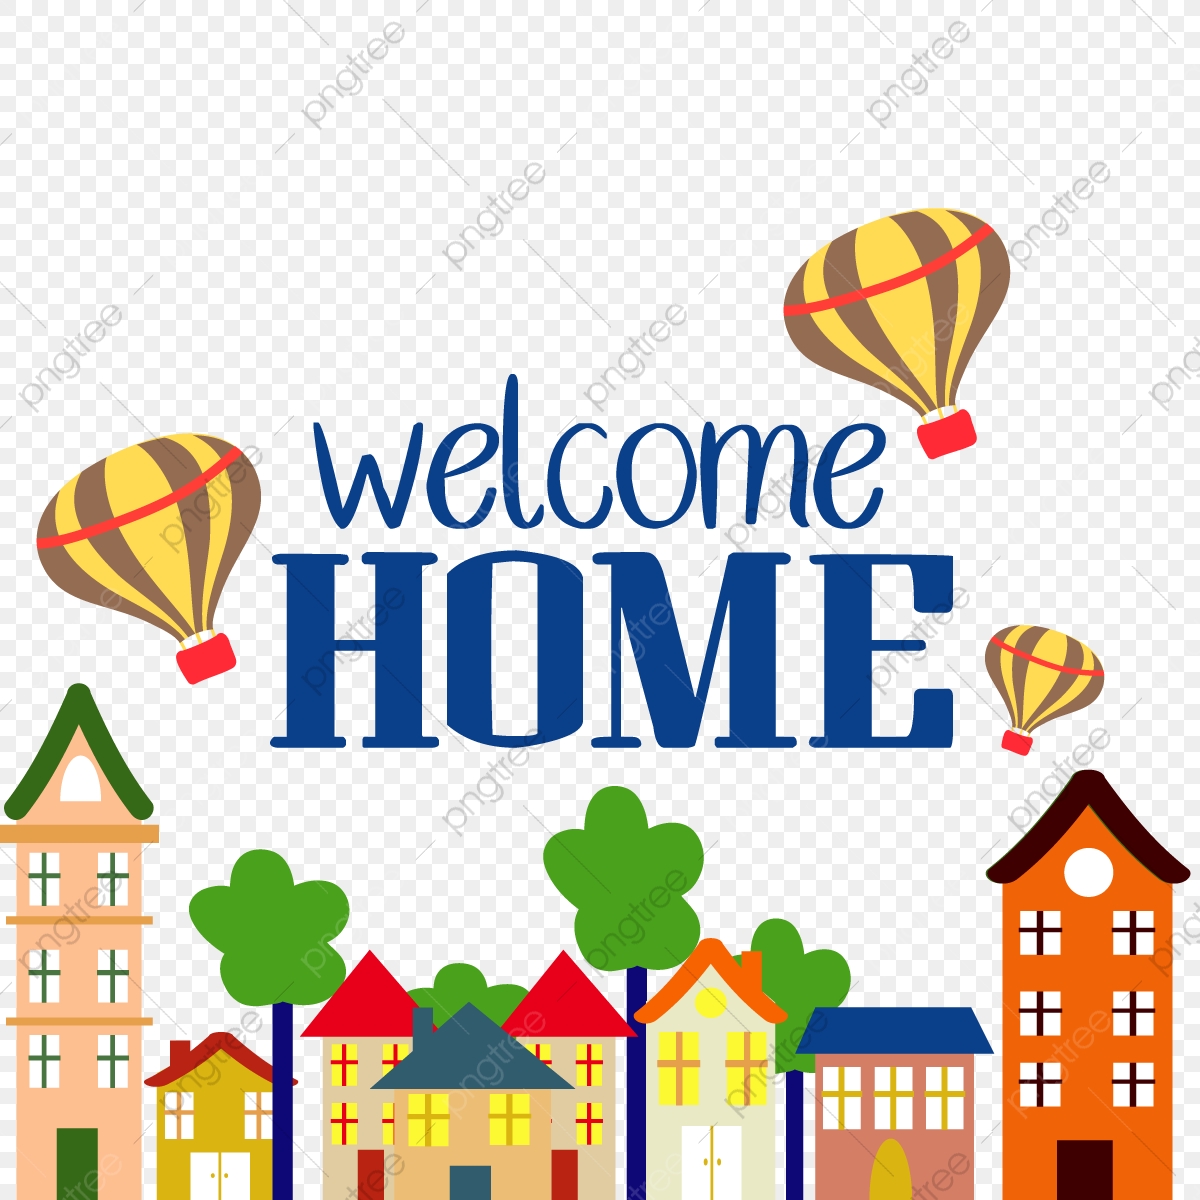 WELCOME HOME!